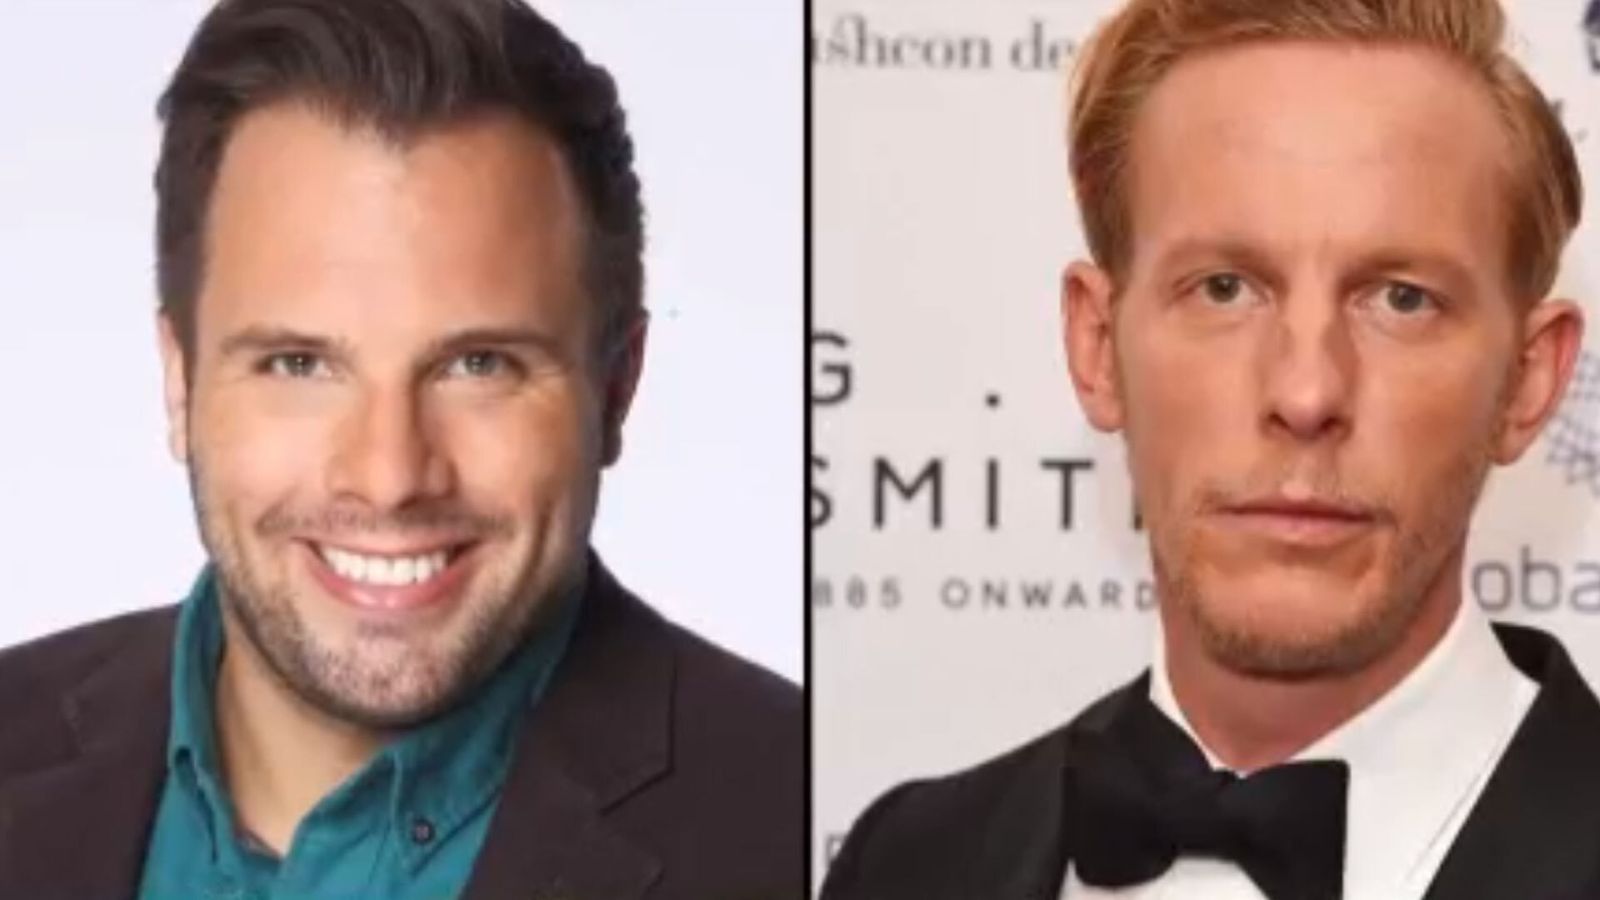 GB News show Dan Wootton Tonight receives more than 8,000 complaints after Laurence Fox comments